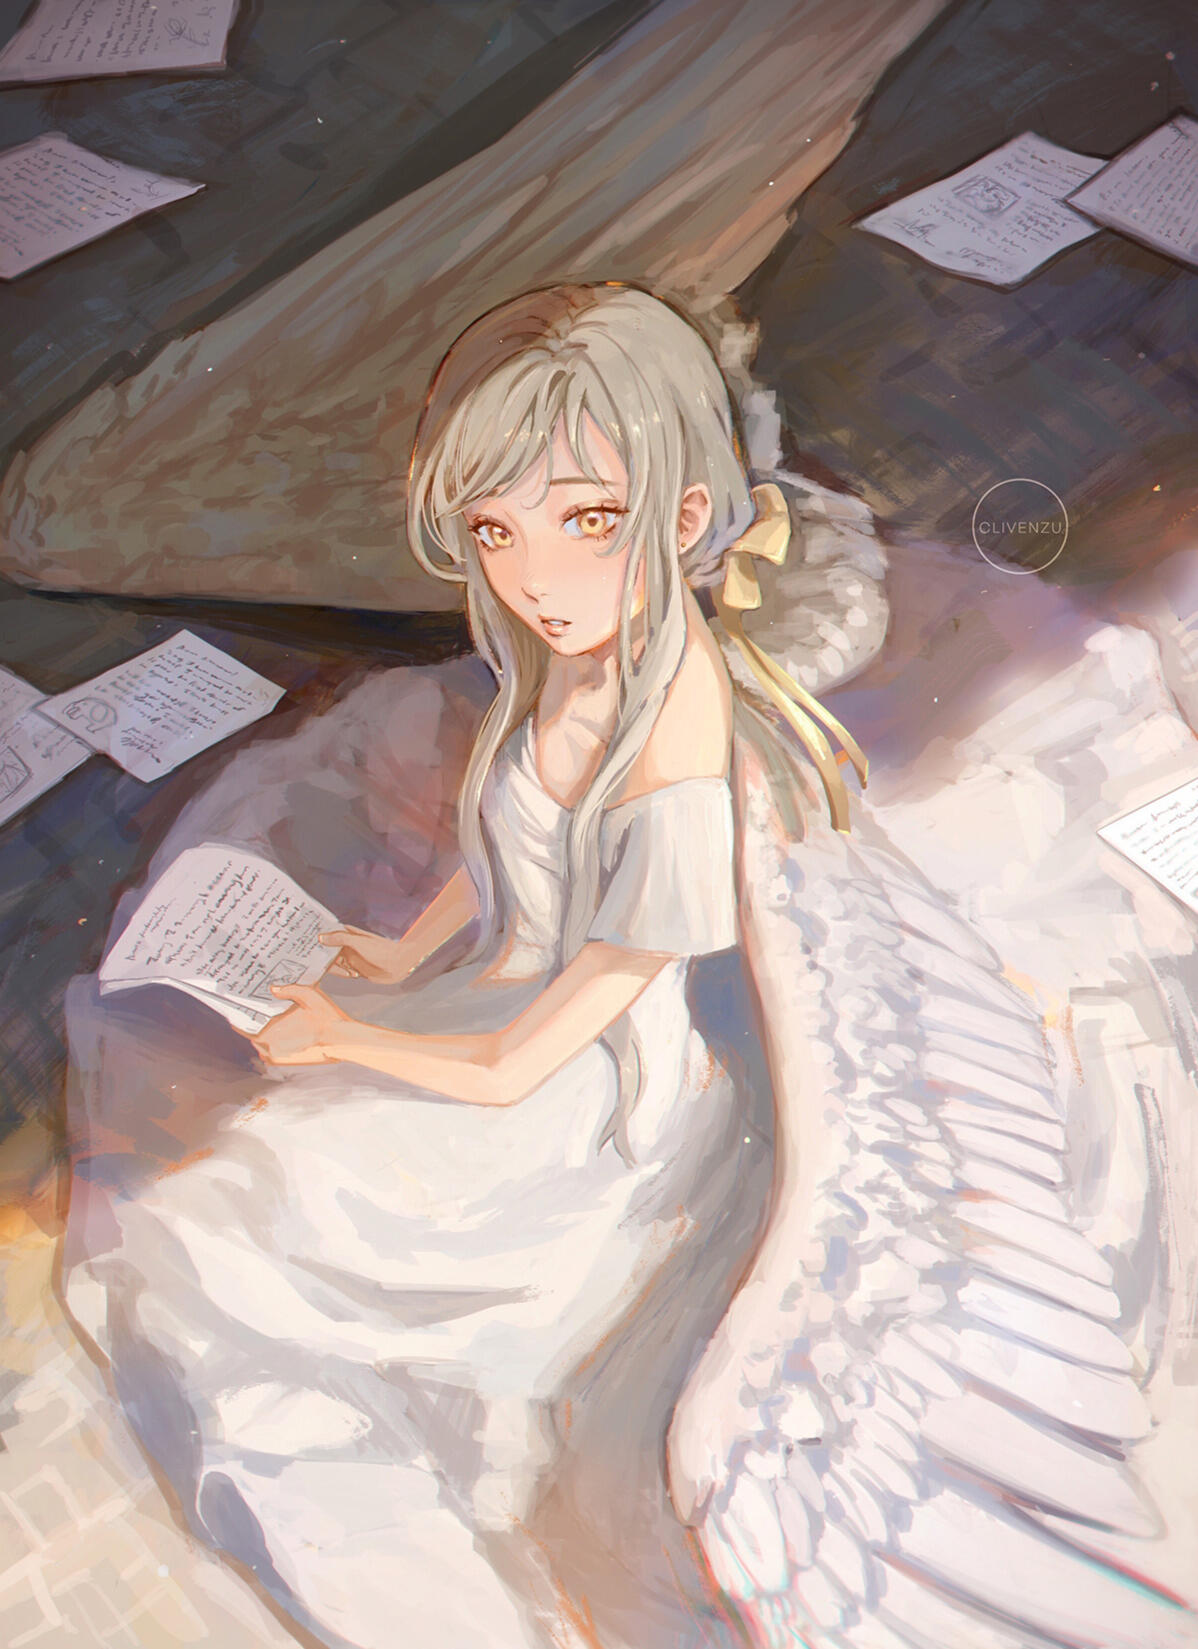 Reading letters from you